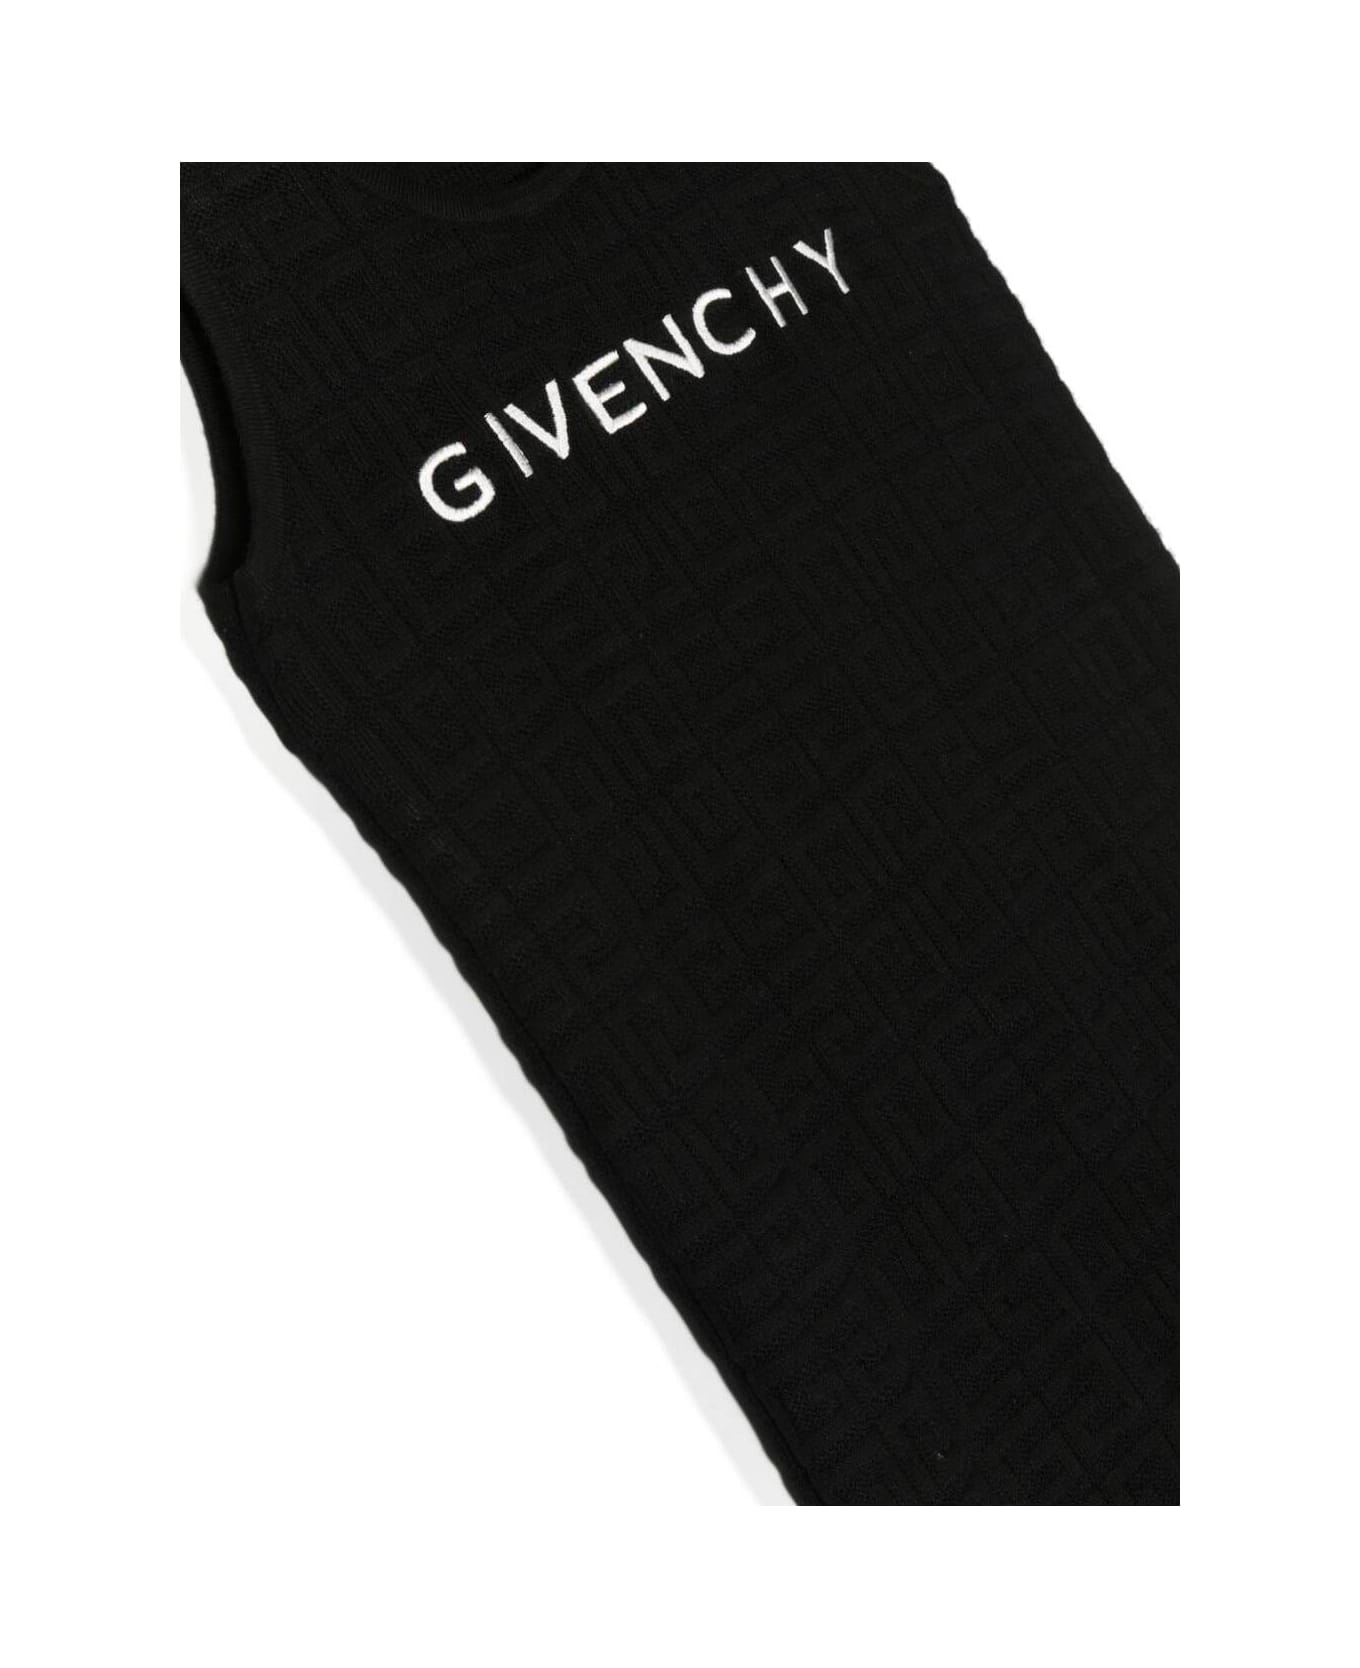 Givenchy Black Sleeveless Dress With Embroidered Monogram And Logo In Viscose Girl - Black